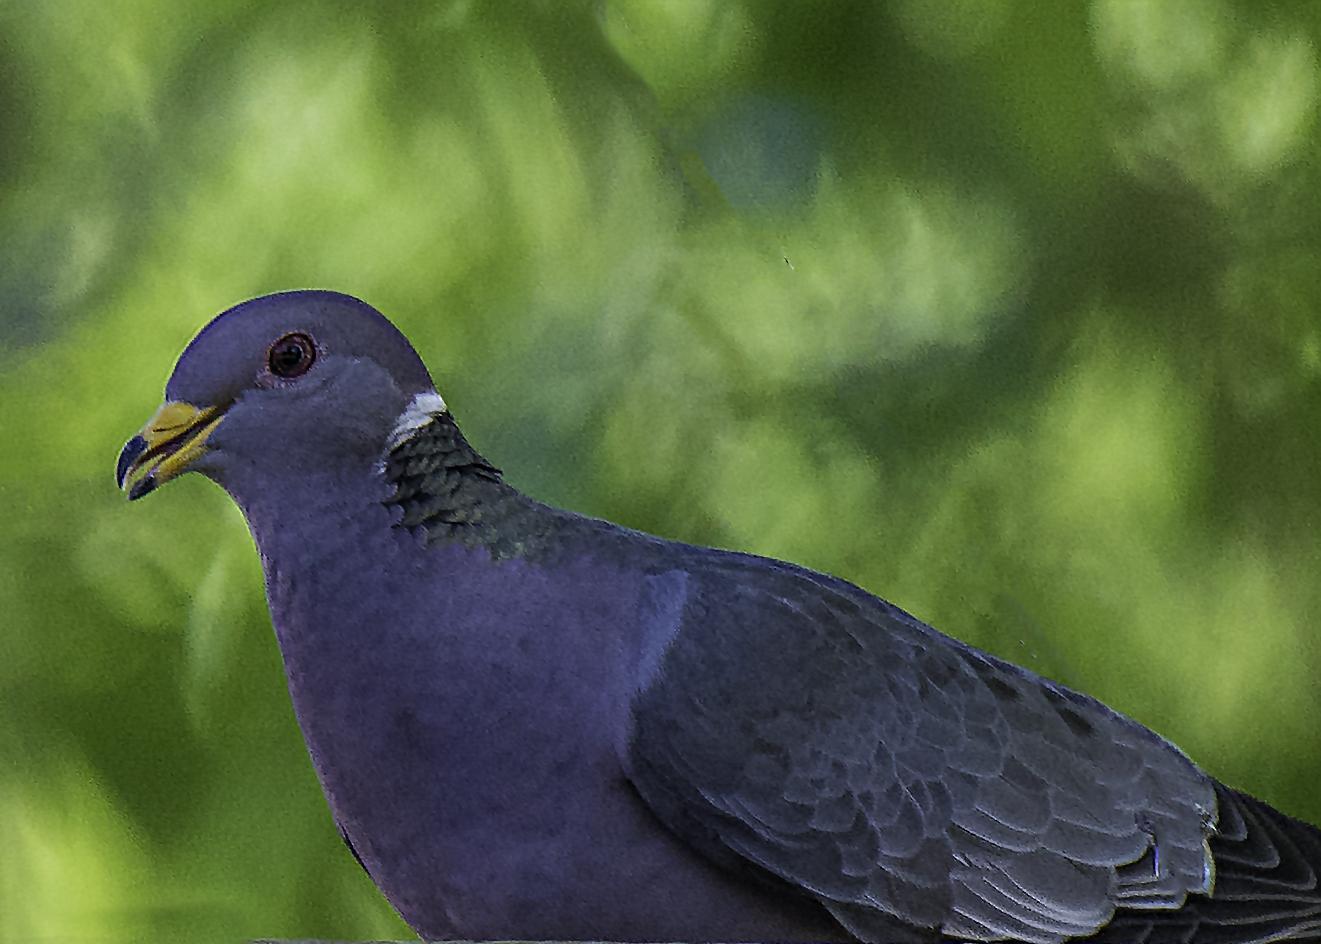 Band-tailed Pigeon Photo by Mason Rose